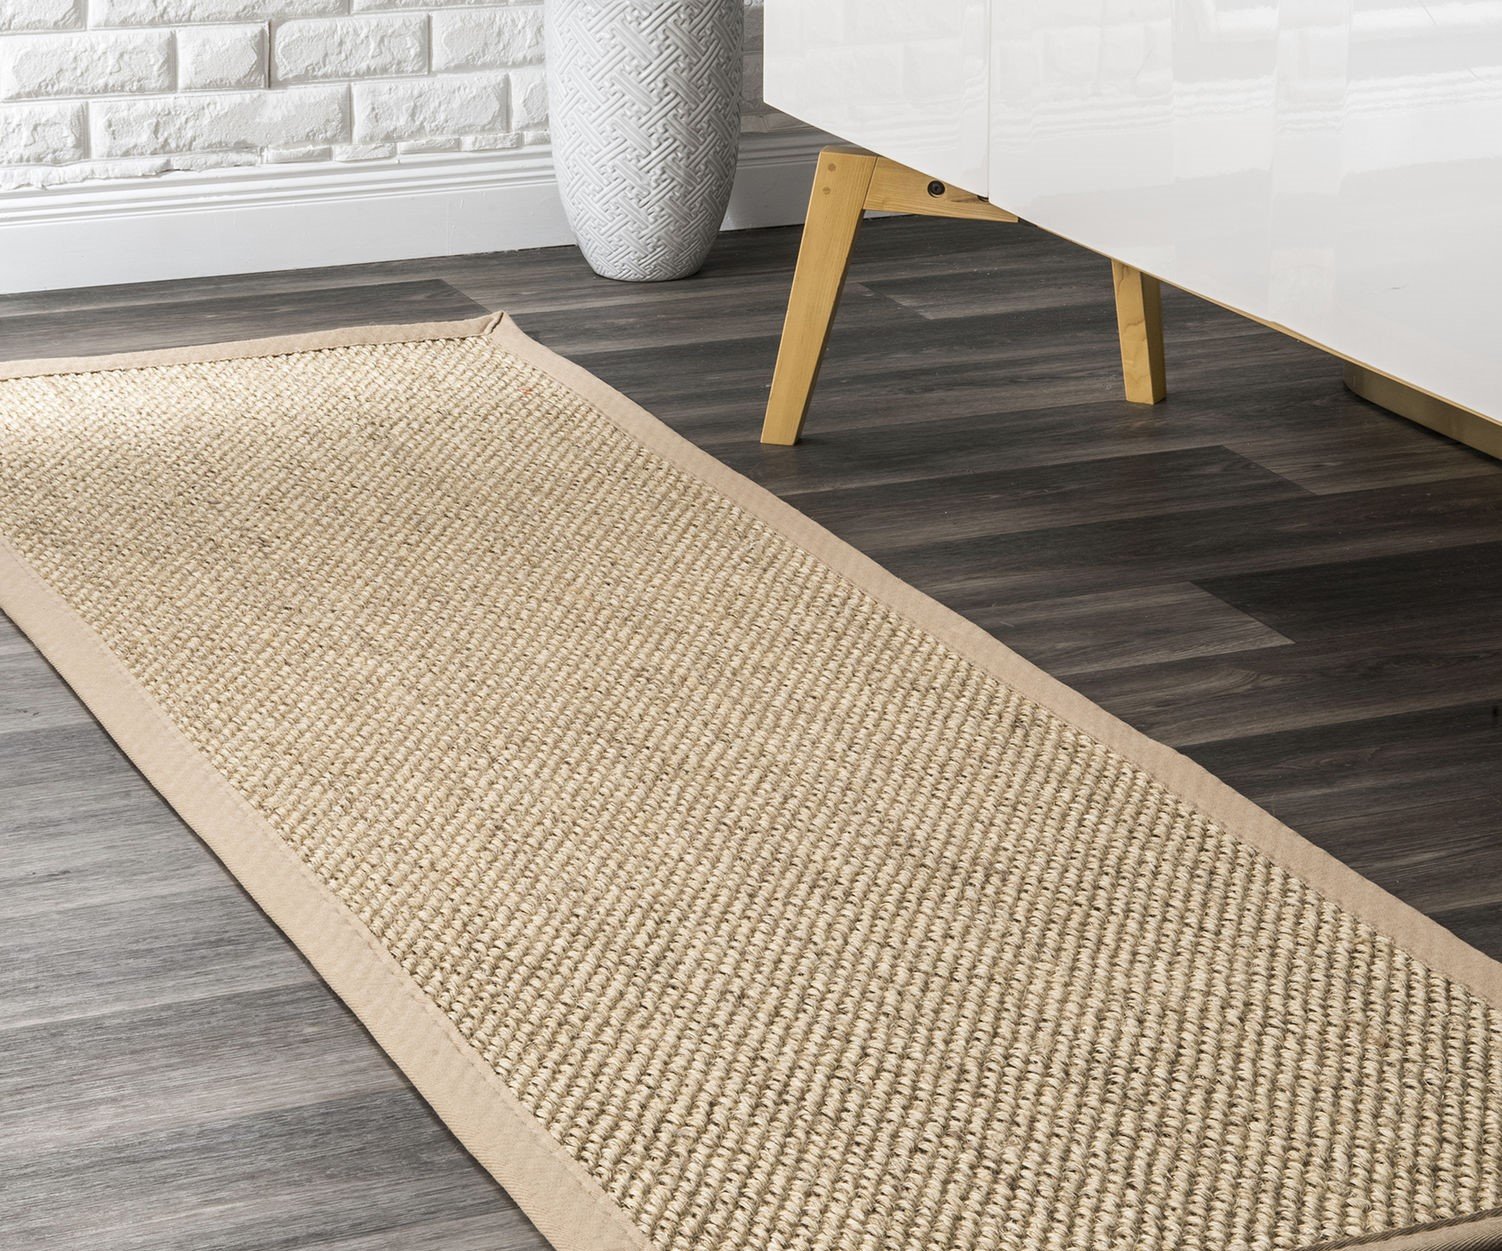 https://imagedelivery.net/ExKHvoWzpvFxpqockAGXOw/images/blog/2020/04/Natural-Cindy-Rug-from-Kona-Sisal-and-Jute-by-NuLoom_CuDKKqA.jpg/fit=crop,width=1502